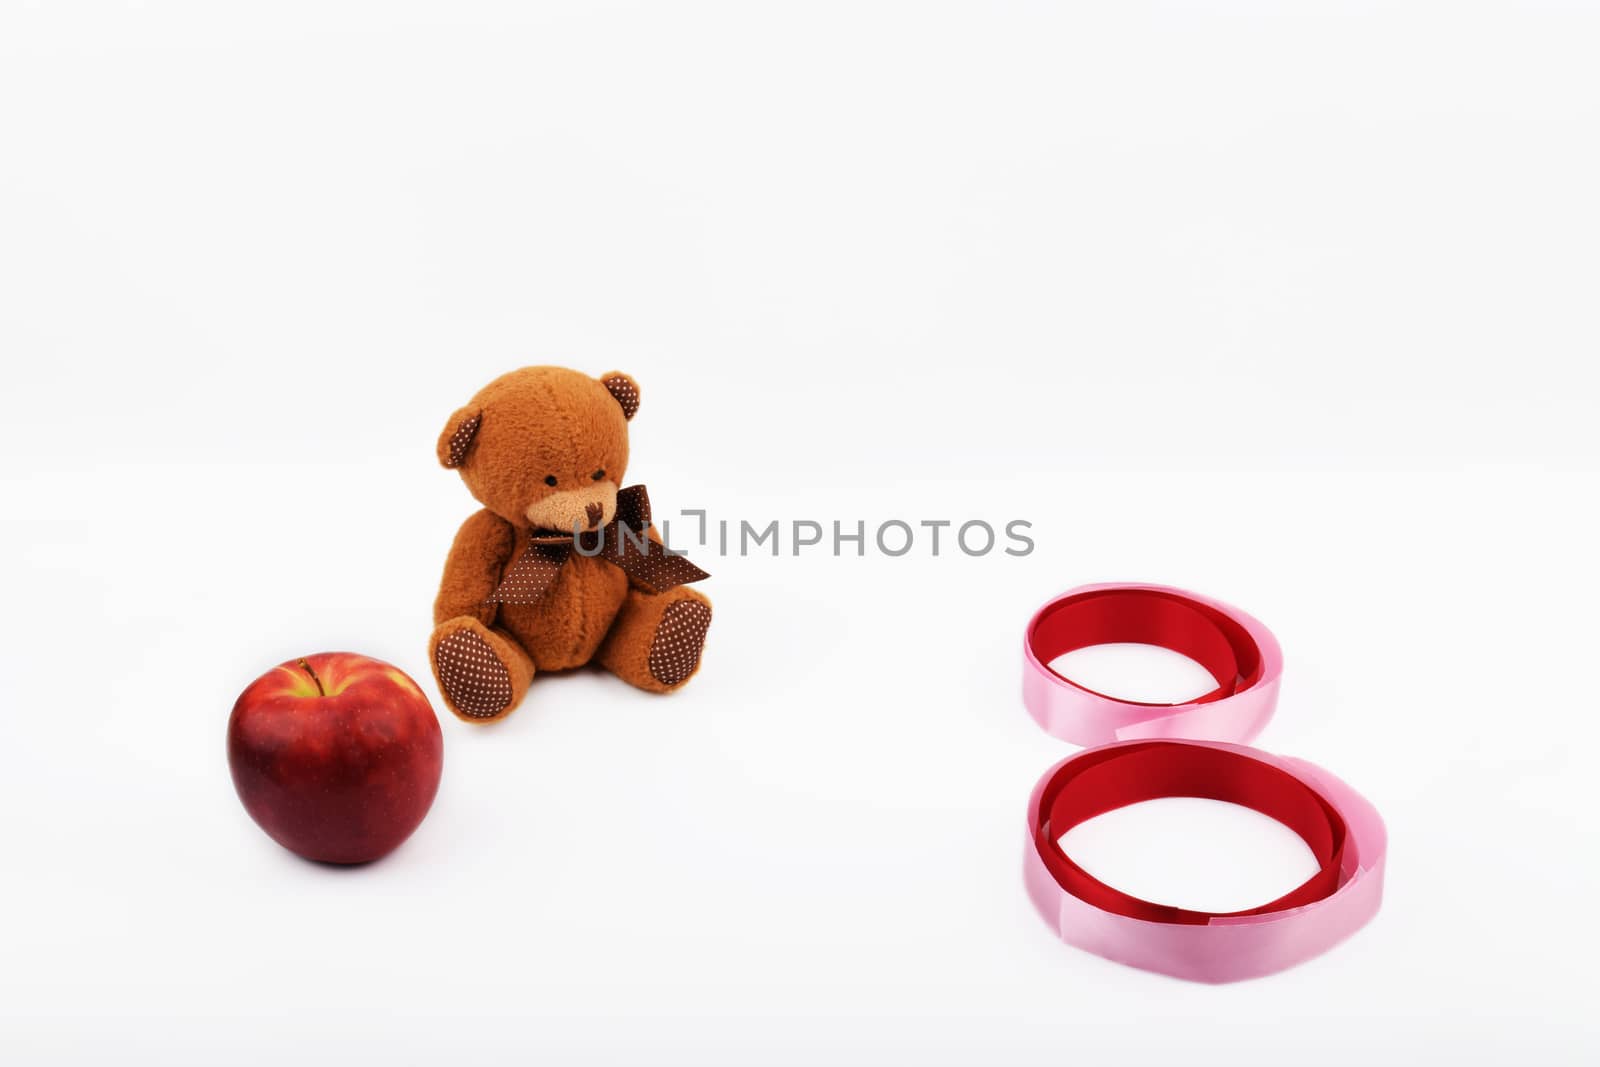 Mock up objects on the white background, topic - International Women's Day. Front view